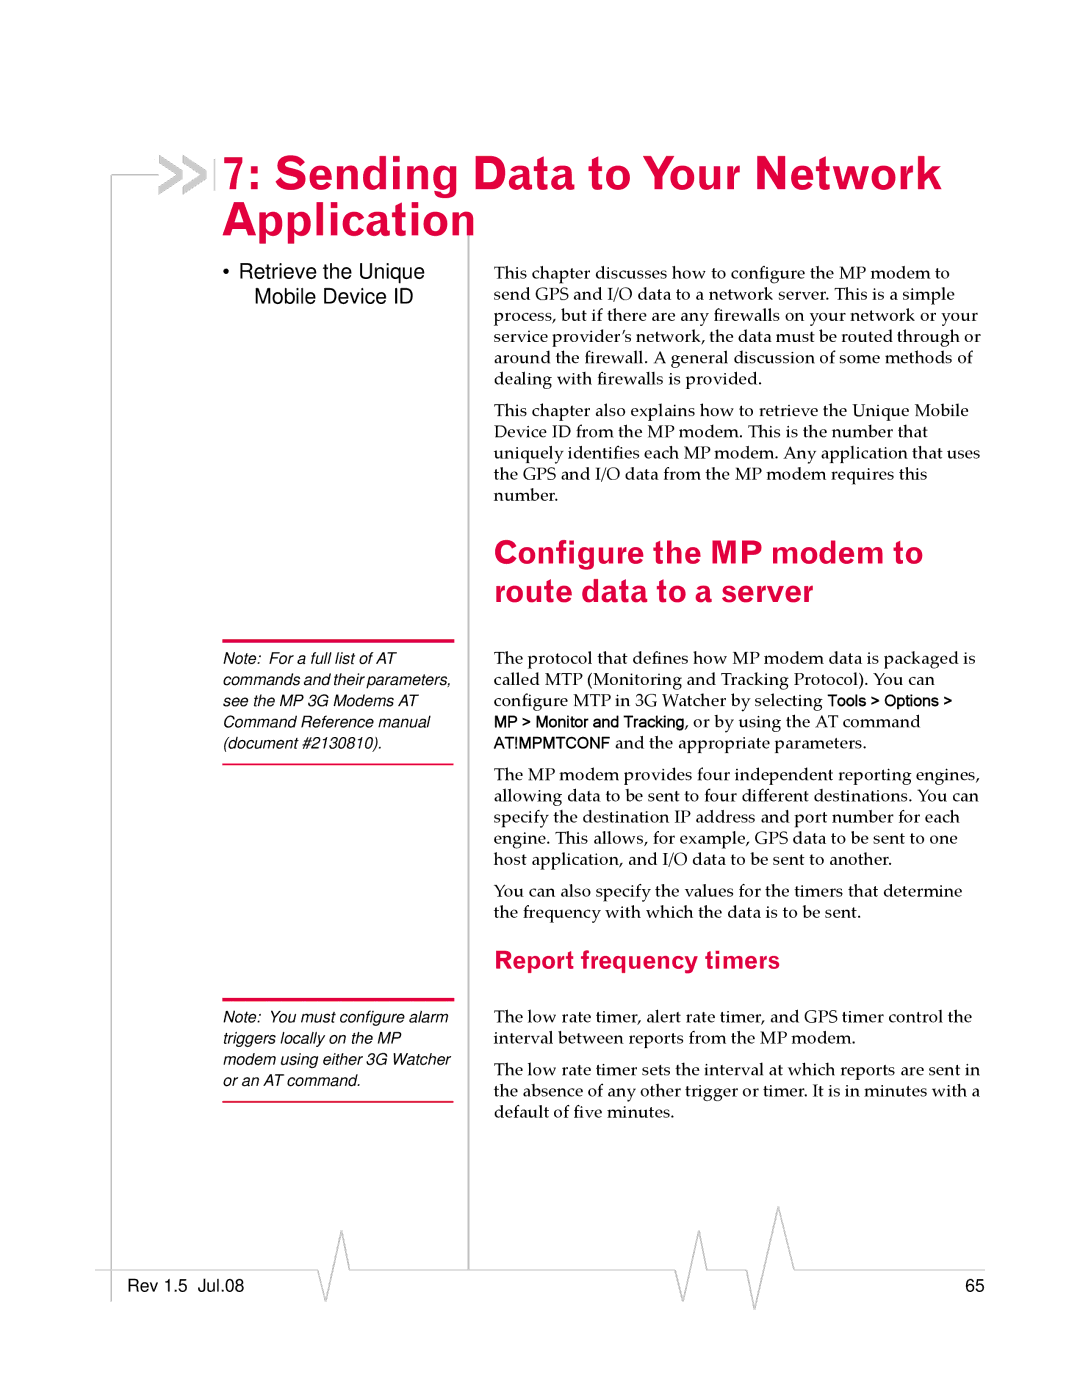 Sierra Wireless MP 875 manual Sending Data to Your Network Application, Configure the MP modem to, Route data to a server 